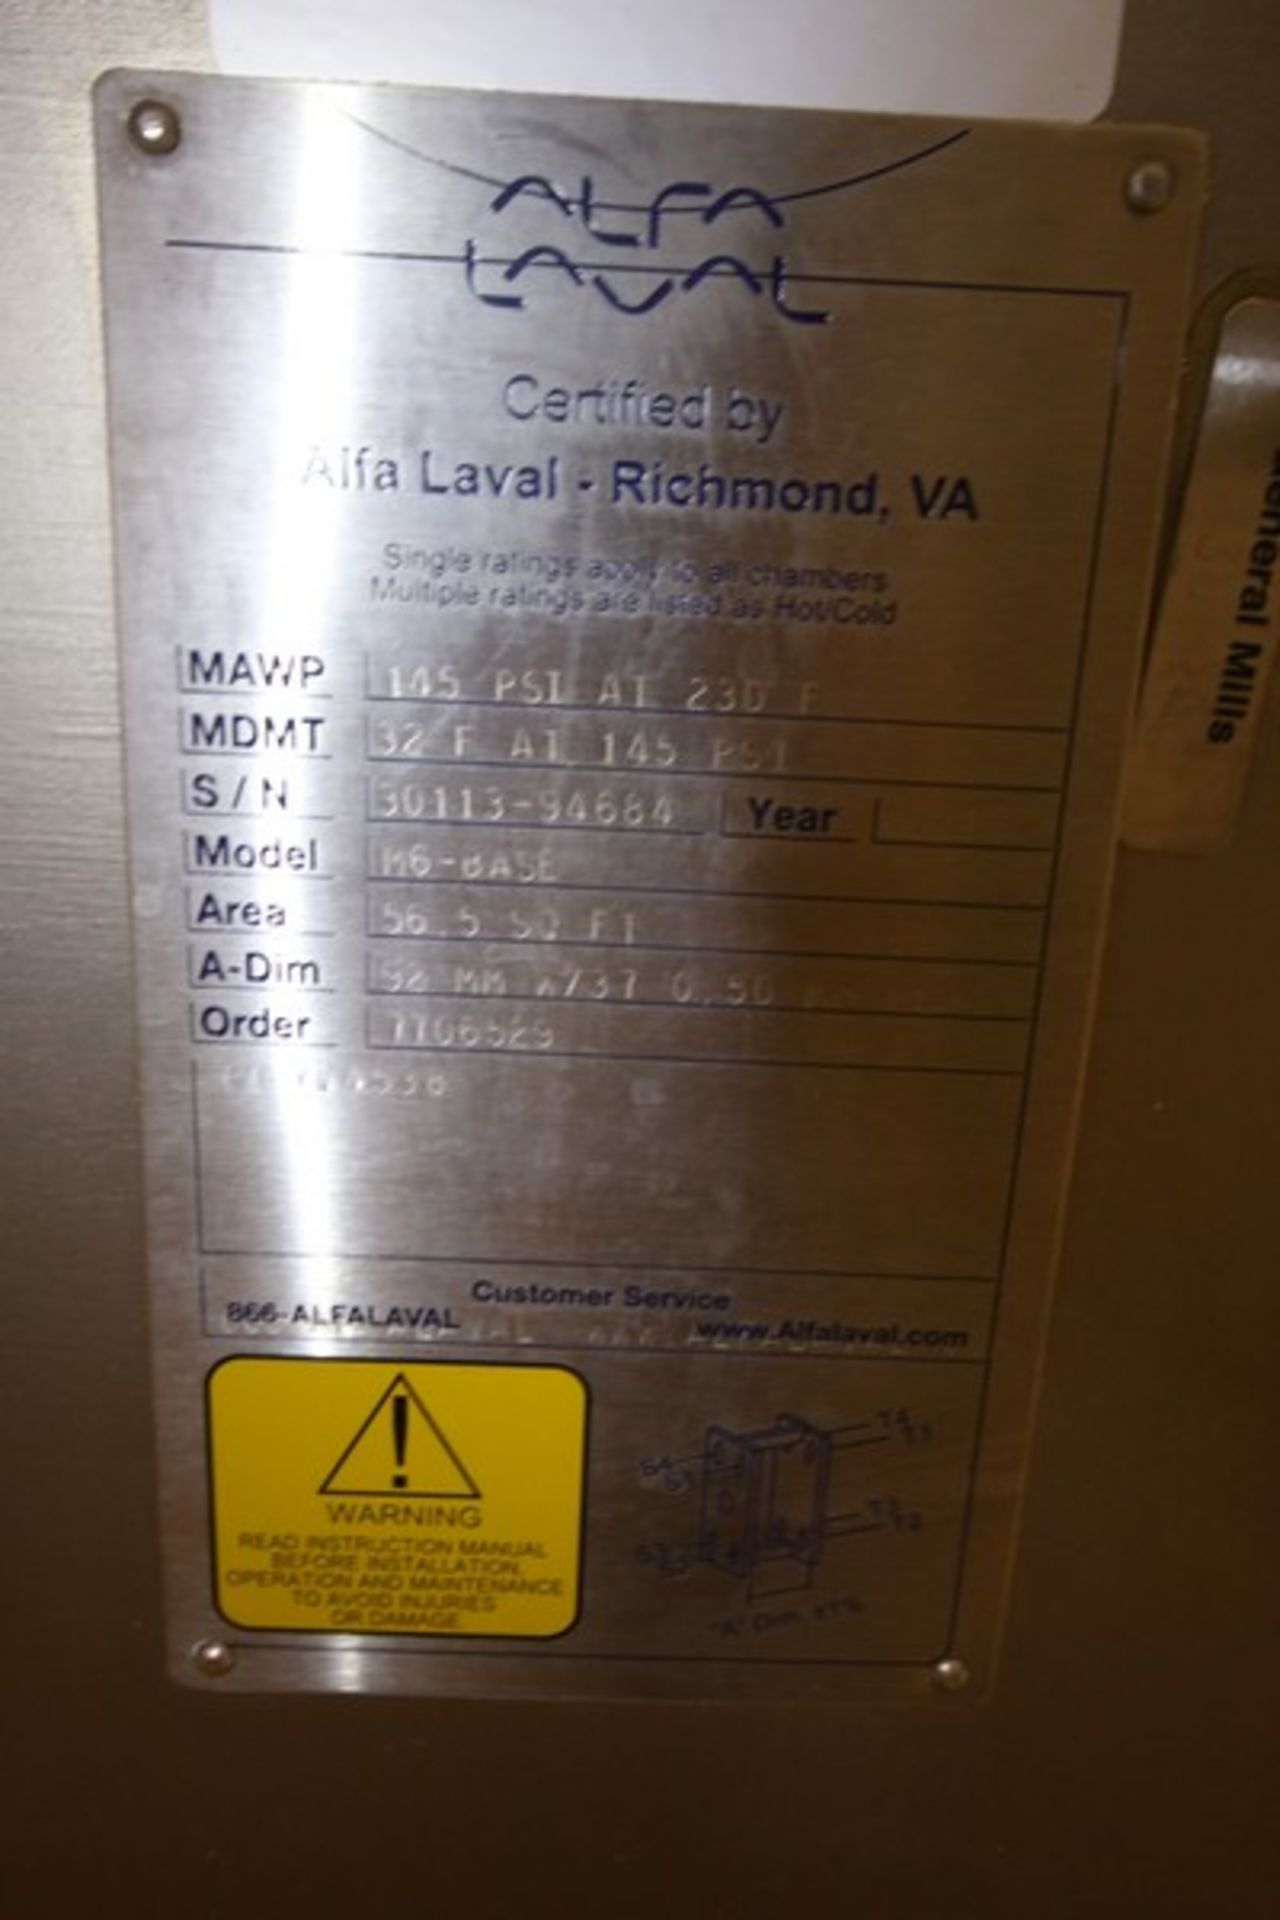 2012 Alfa Laval 36" H S/S Plate Press, Model MG-BASE, SN 30113-94684, with 2" Clamp Type - Image 4 of 4